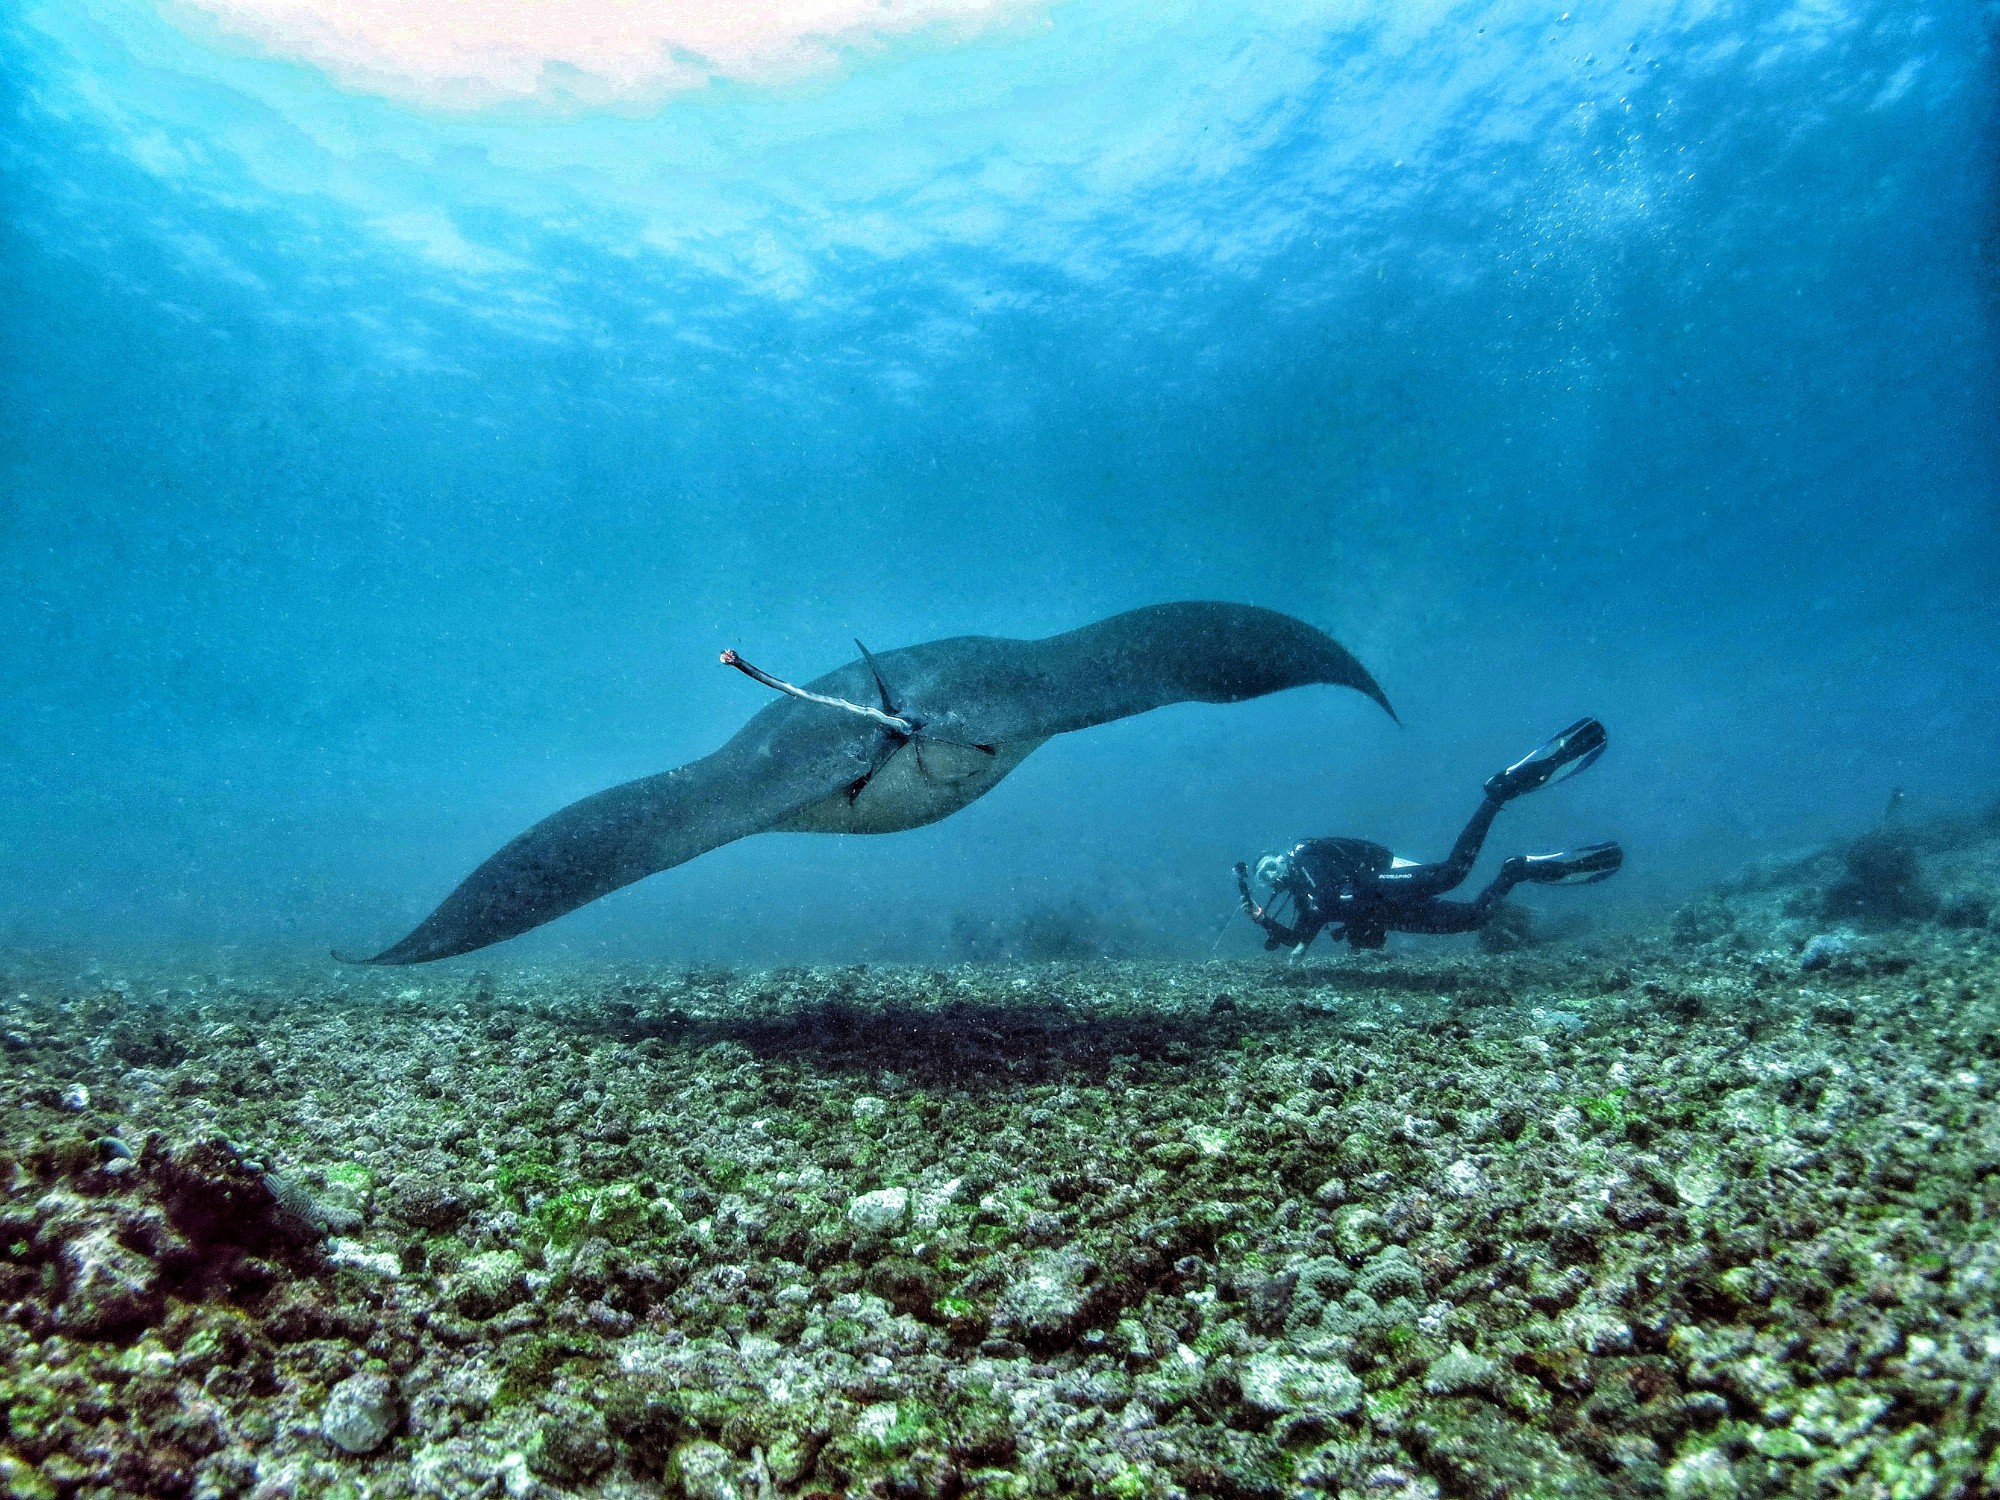 A diver swimming underneath a huge manta ray 